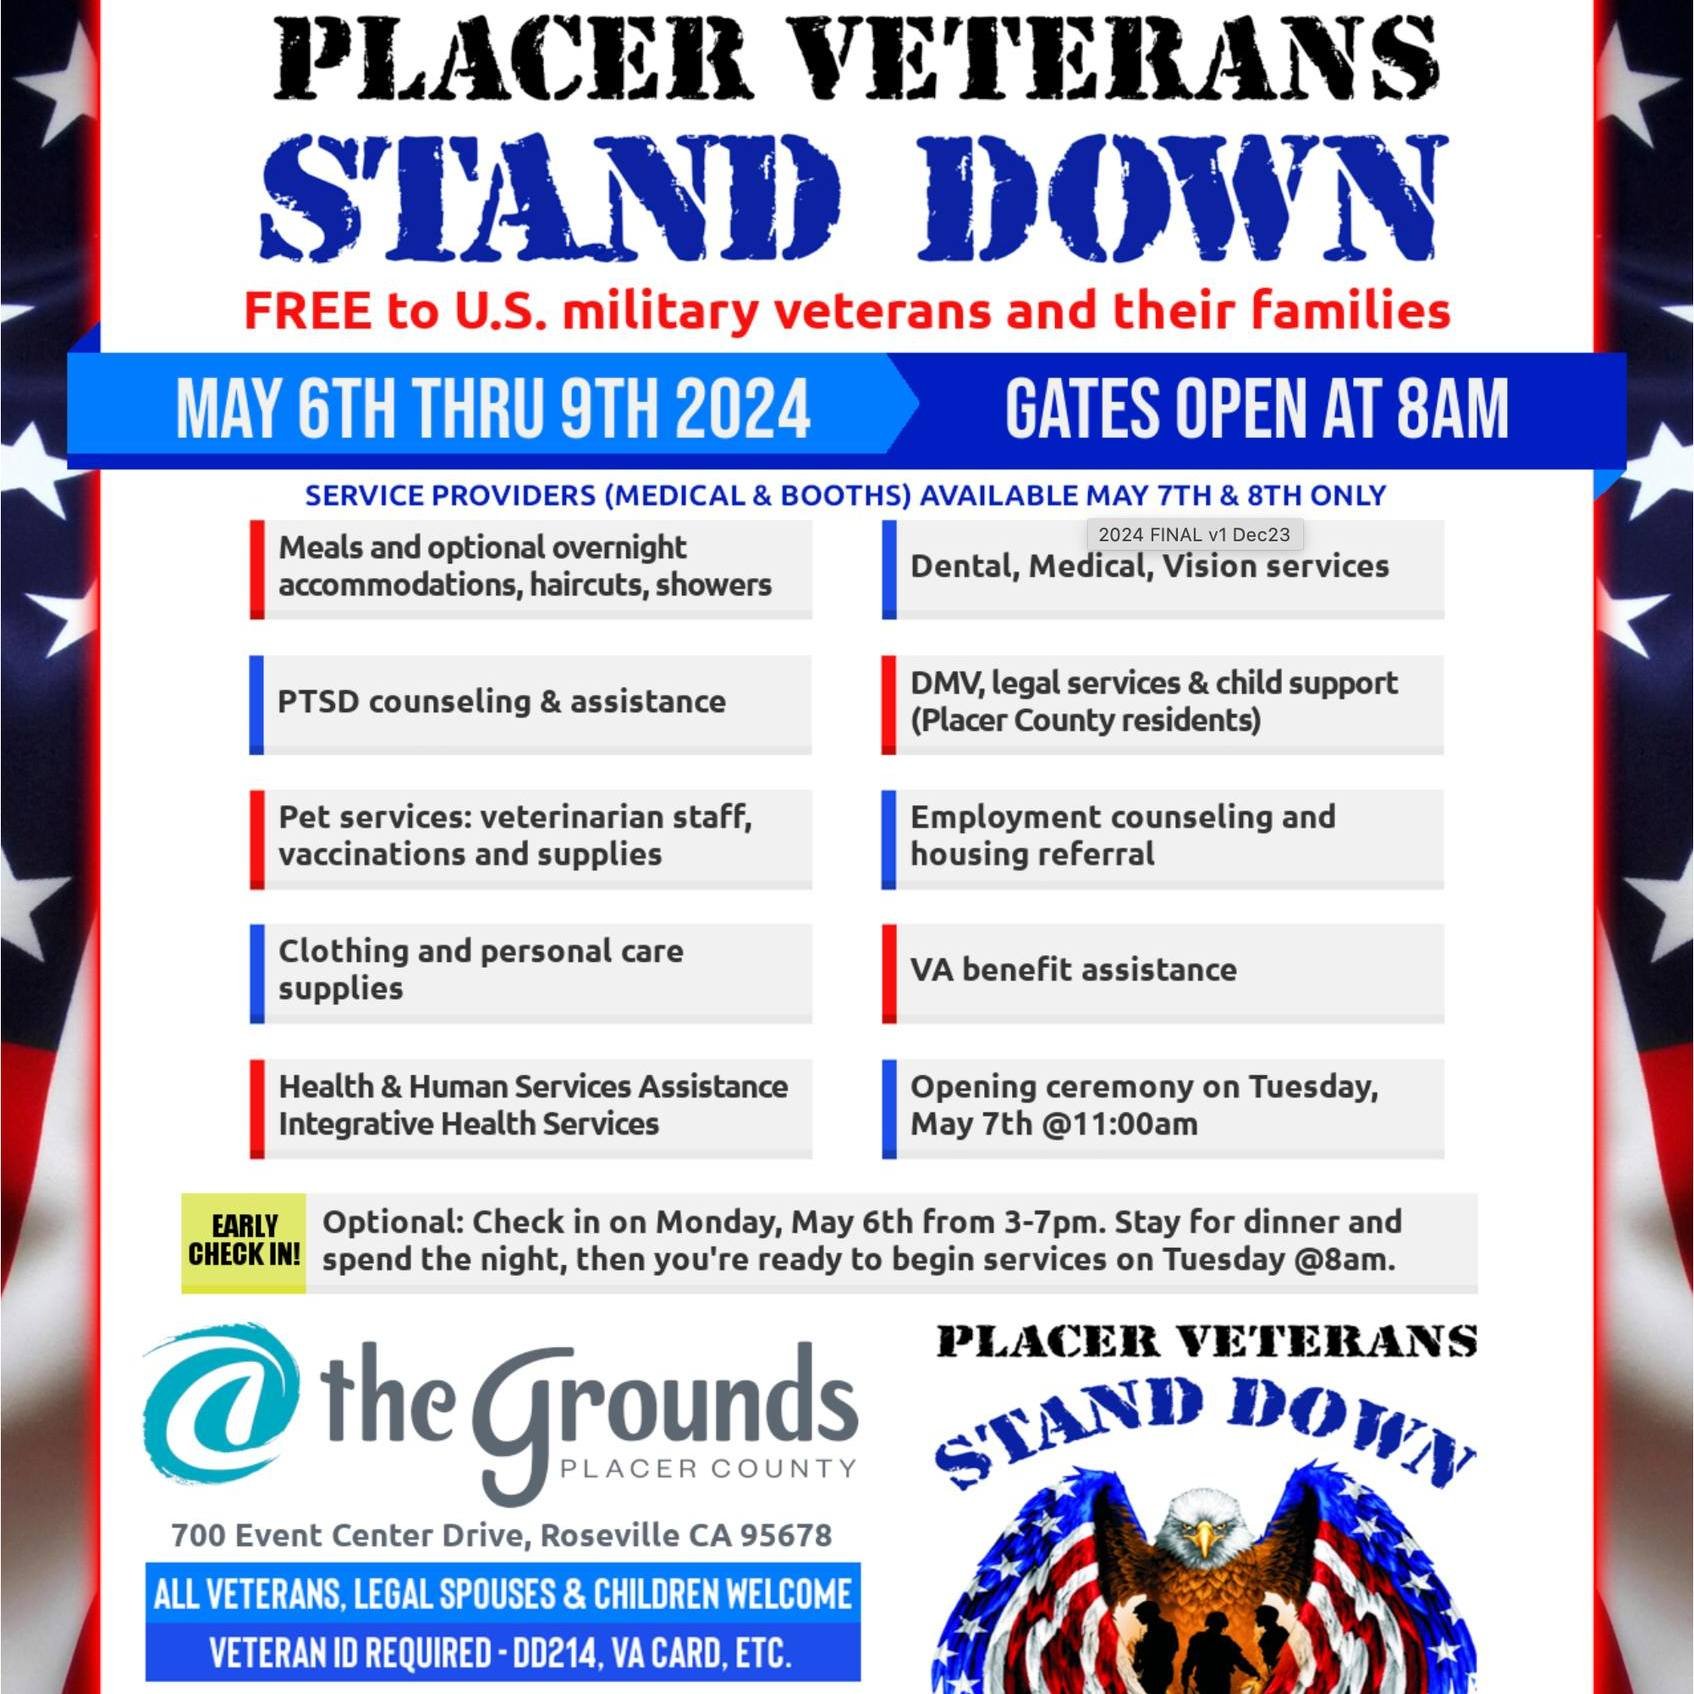 Did you know that there are over 600 low-income or homeless veterans in Placer County? Many lack access to basic services like food, shelter, and medical care. That's why @placervets (PVSD) is hosting a 3-day event starting today to May 9th, 2024.

I